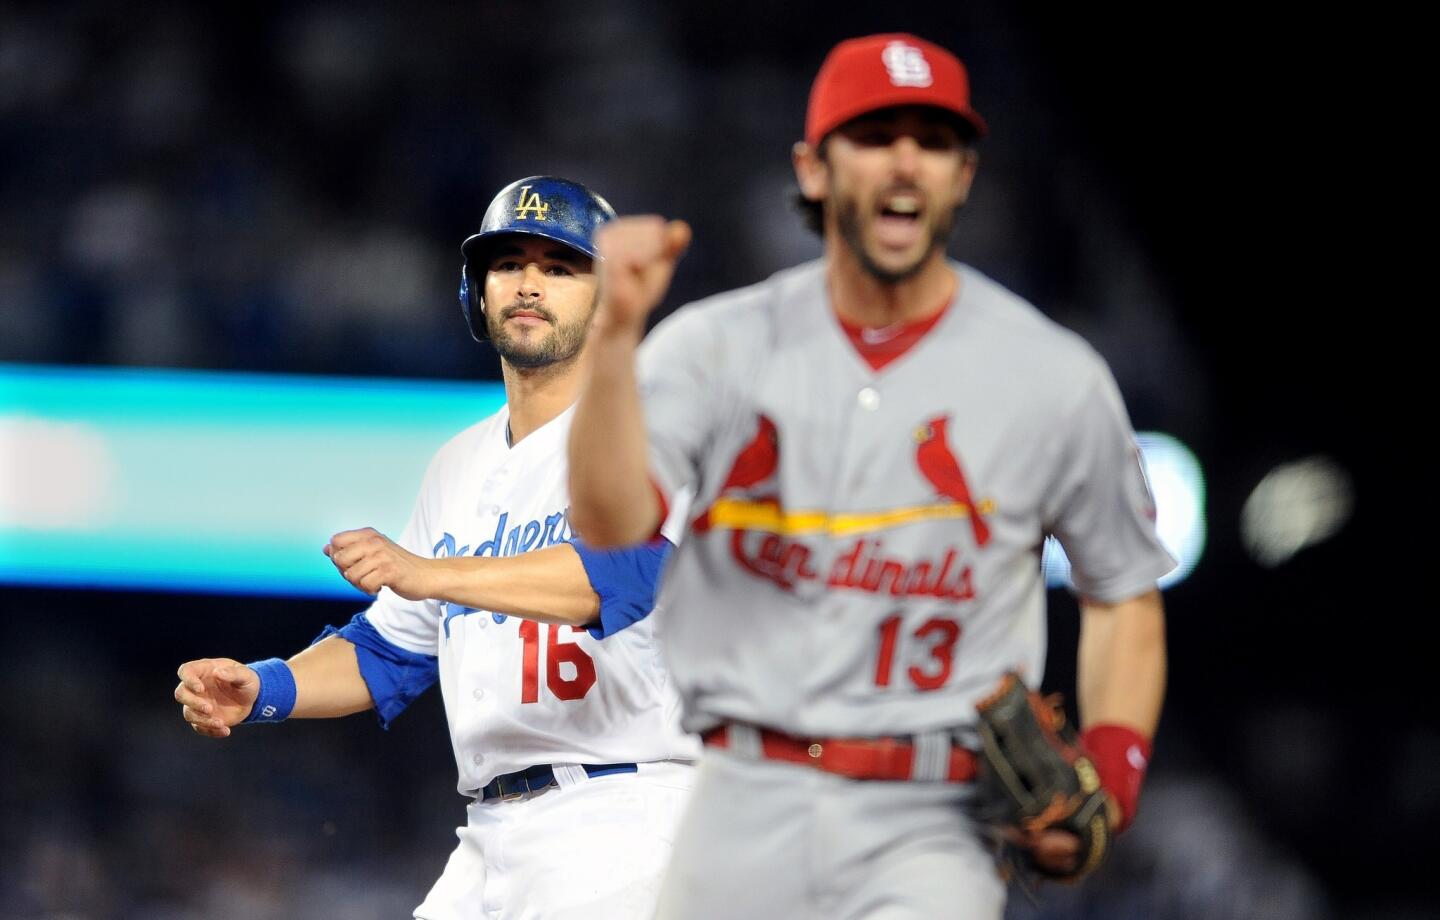 St. Louis second baseman Matt Carpenter celebrates in front of the Dodgers' Andre Either after completing a ninth-inning double play in the Dodgers' 4-2 loss in Game 4 of the NLCS.